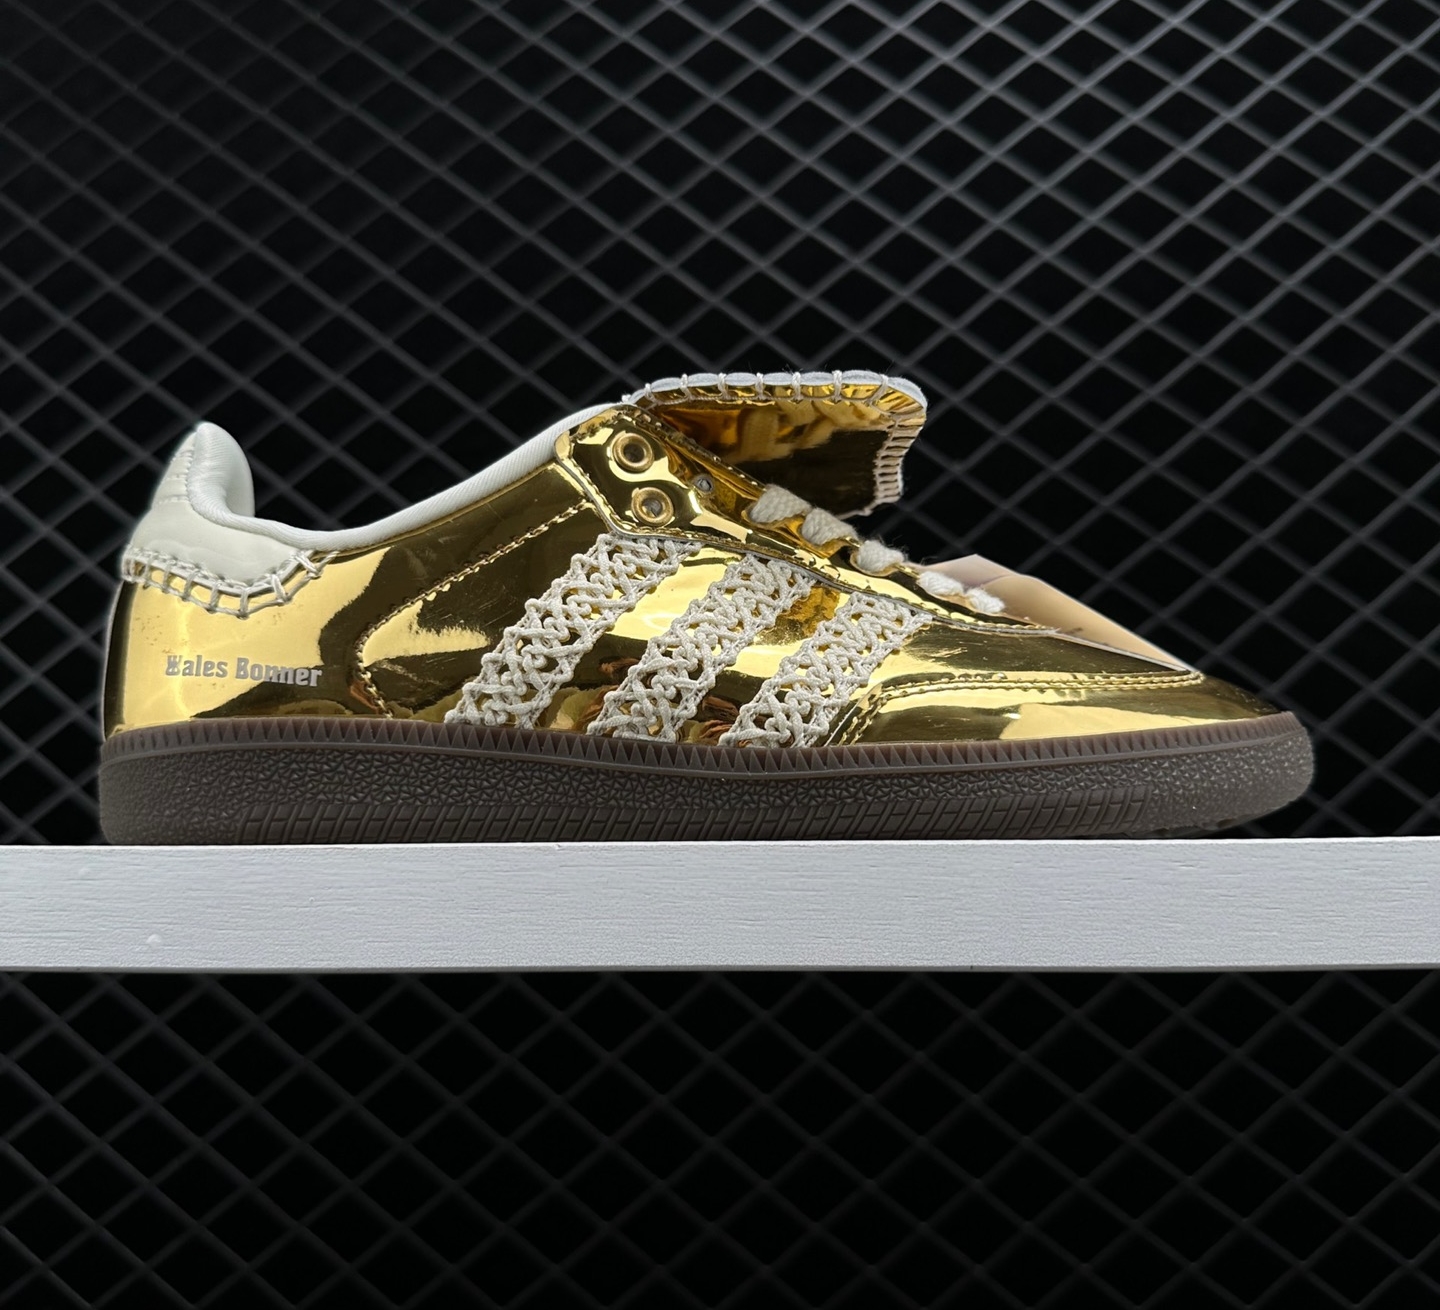 Adidas Samba Wales Bonner Gold: Premium Footwear with a Touch of Elegance